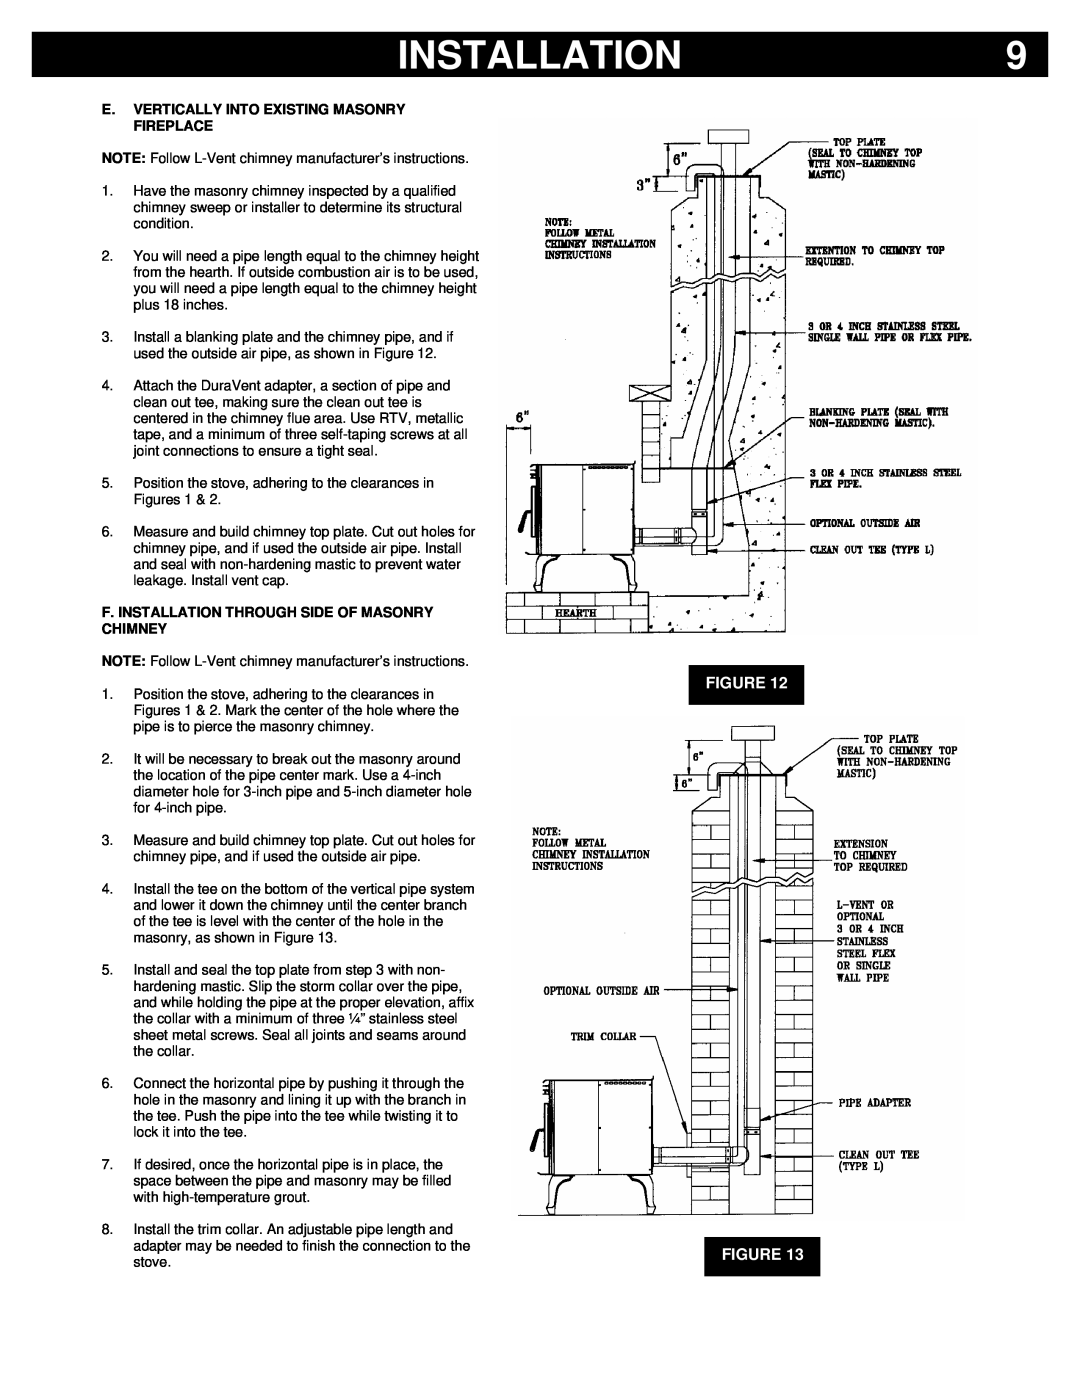 Breckwell P22FSL, P22I, P22FSA owner manual Installation, Figure Figure, E.Vertically Into Existing Masonry Fireplace 